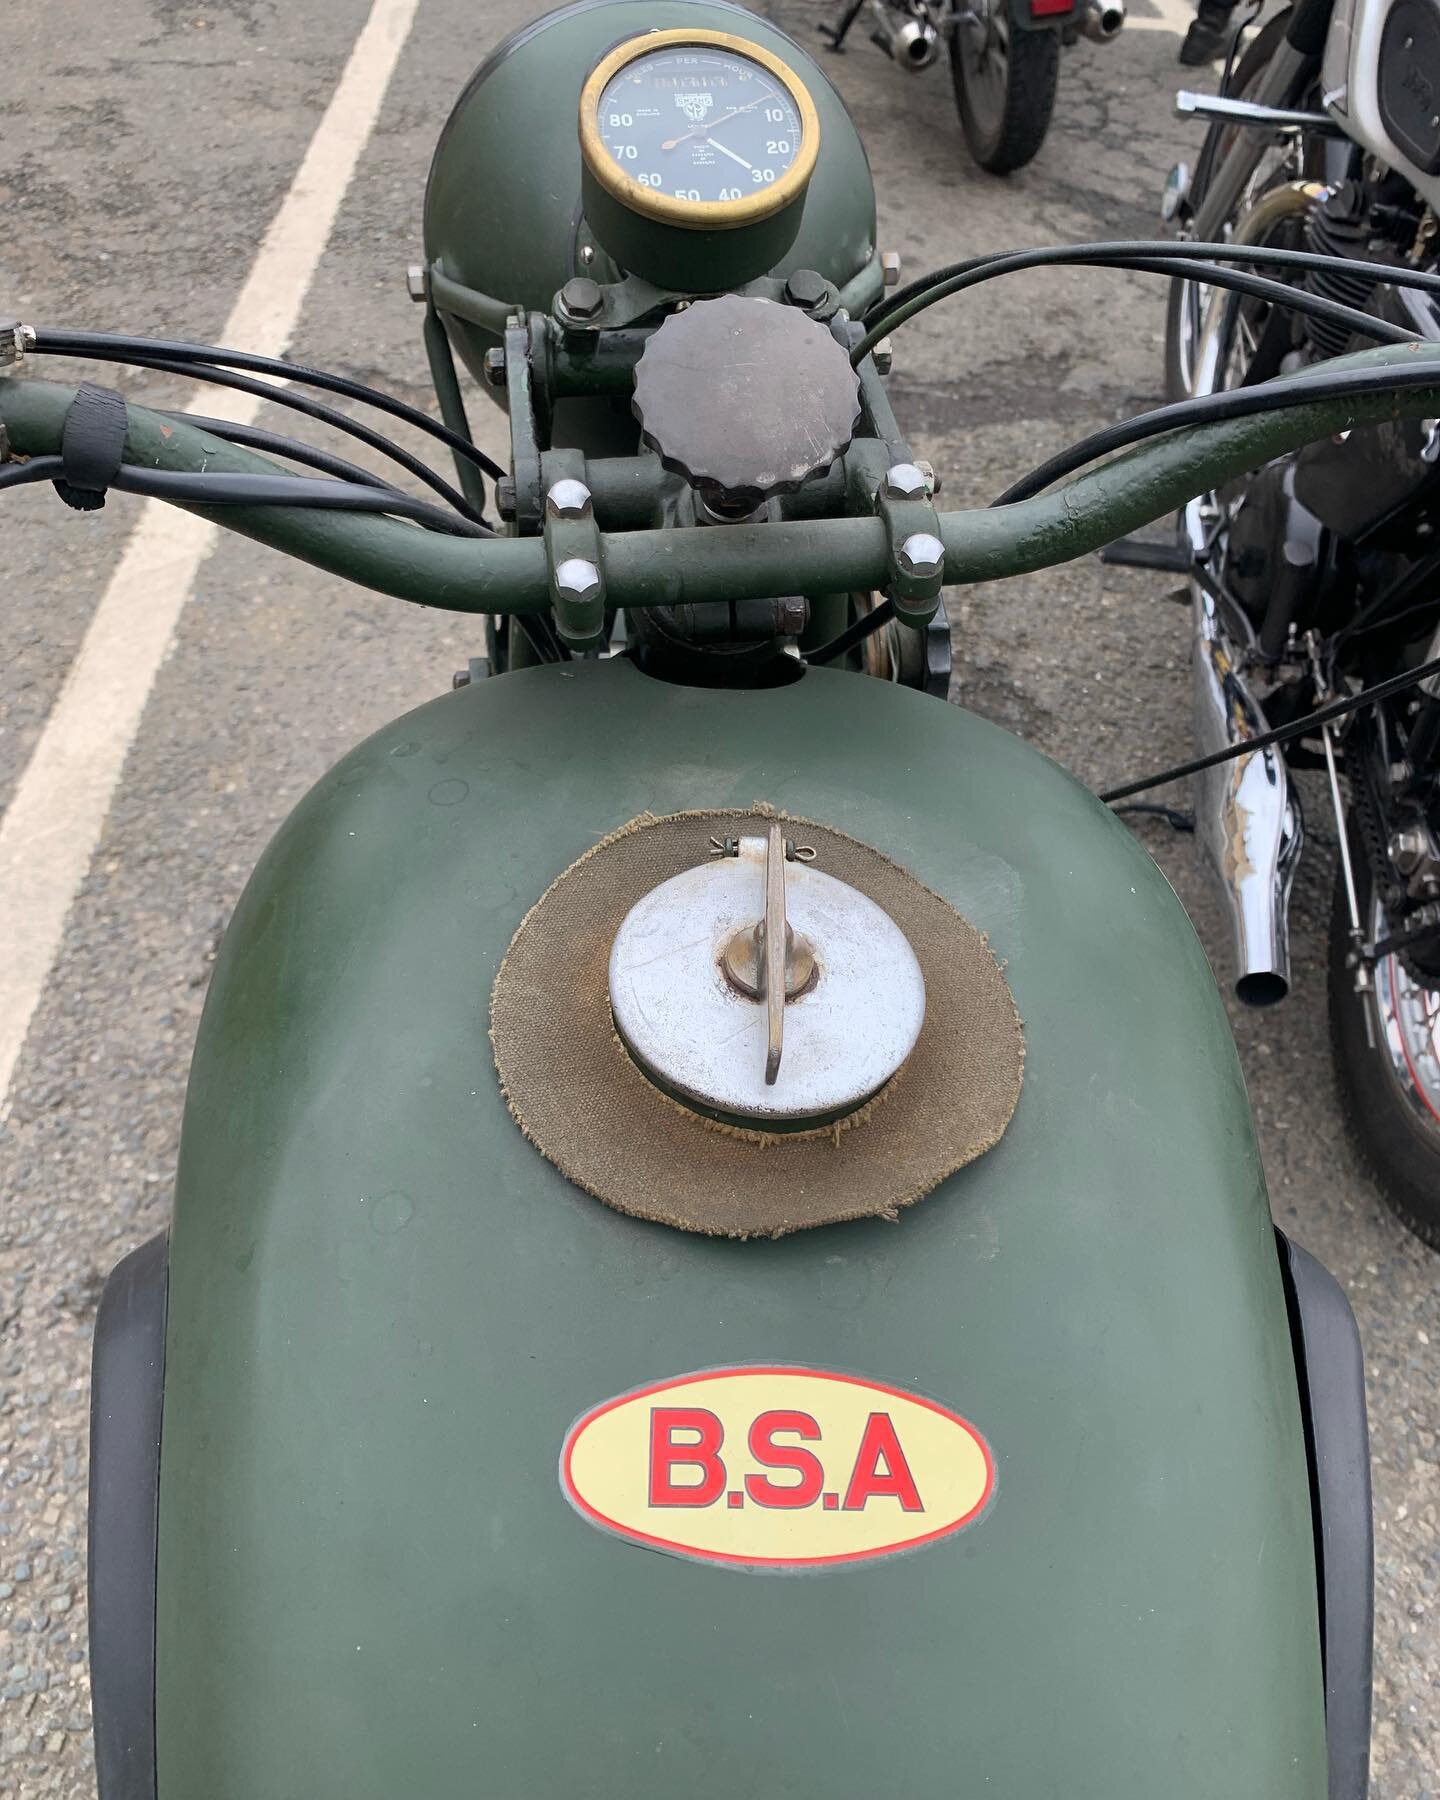 WD BSA out on our Bluebell run today. 
@bsamotorcyclesofficial 
@bsamotorcycles